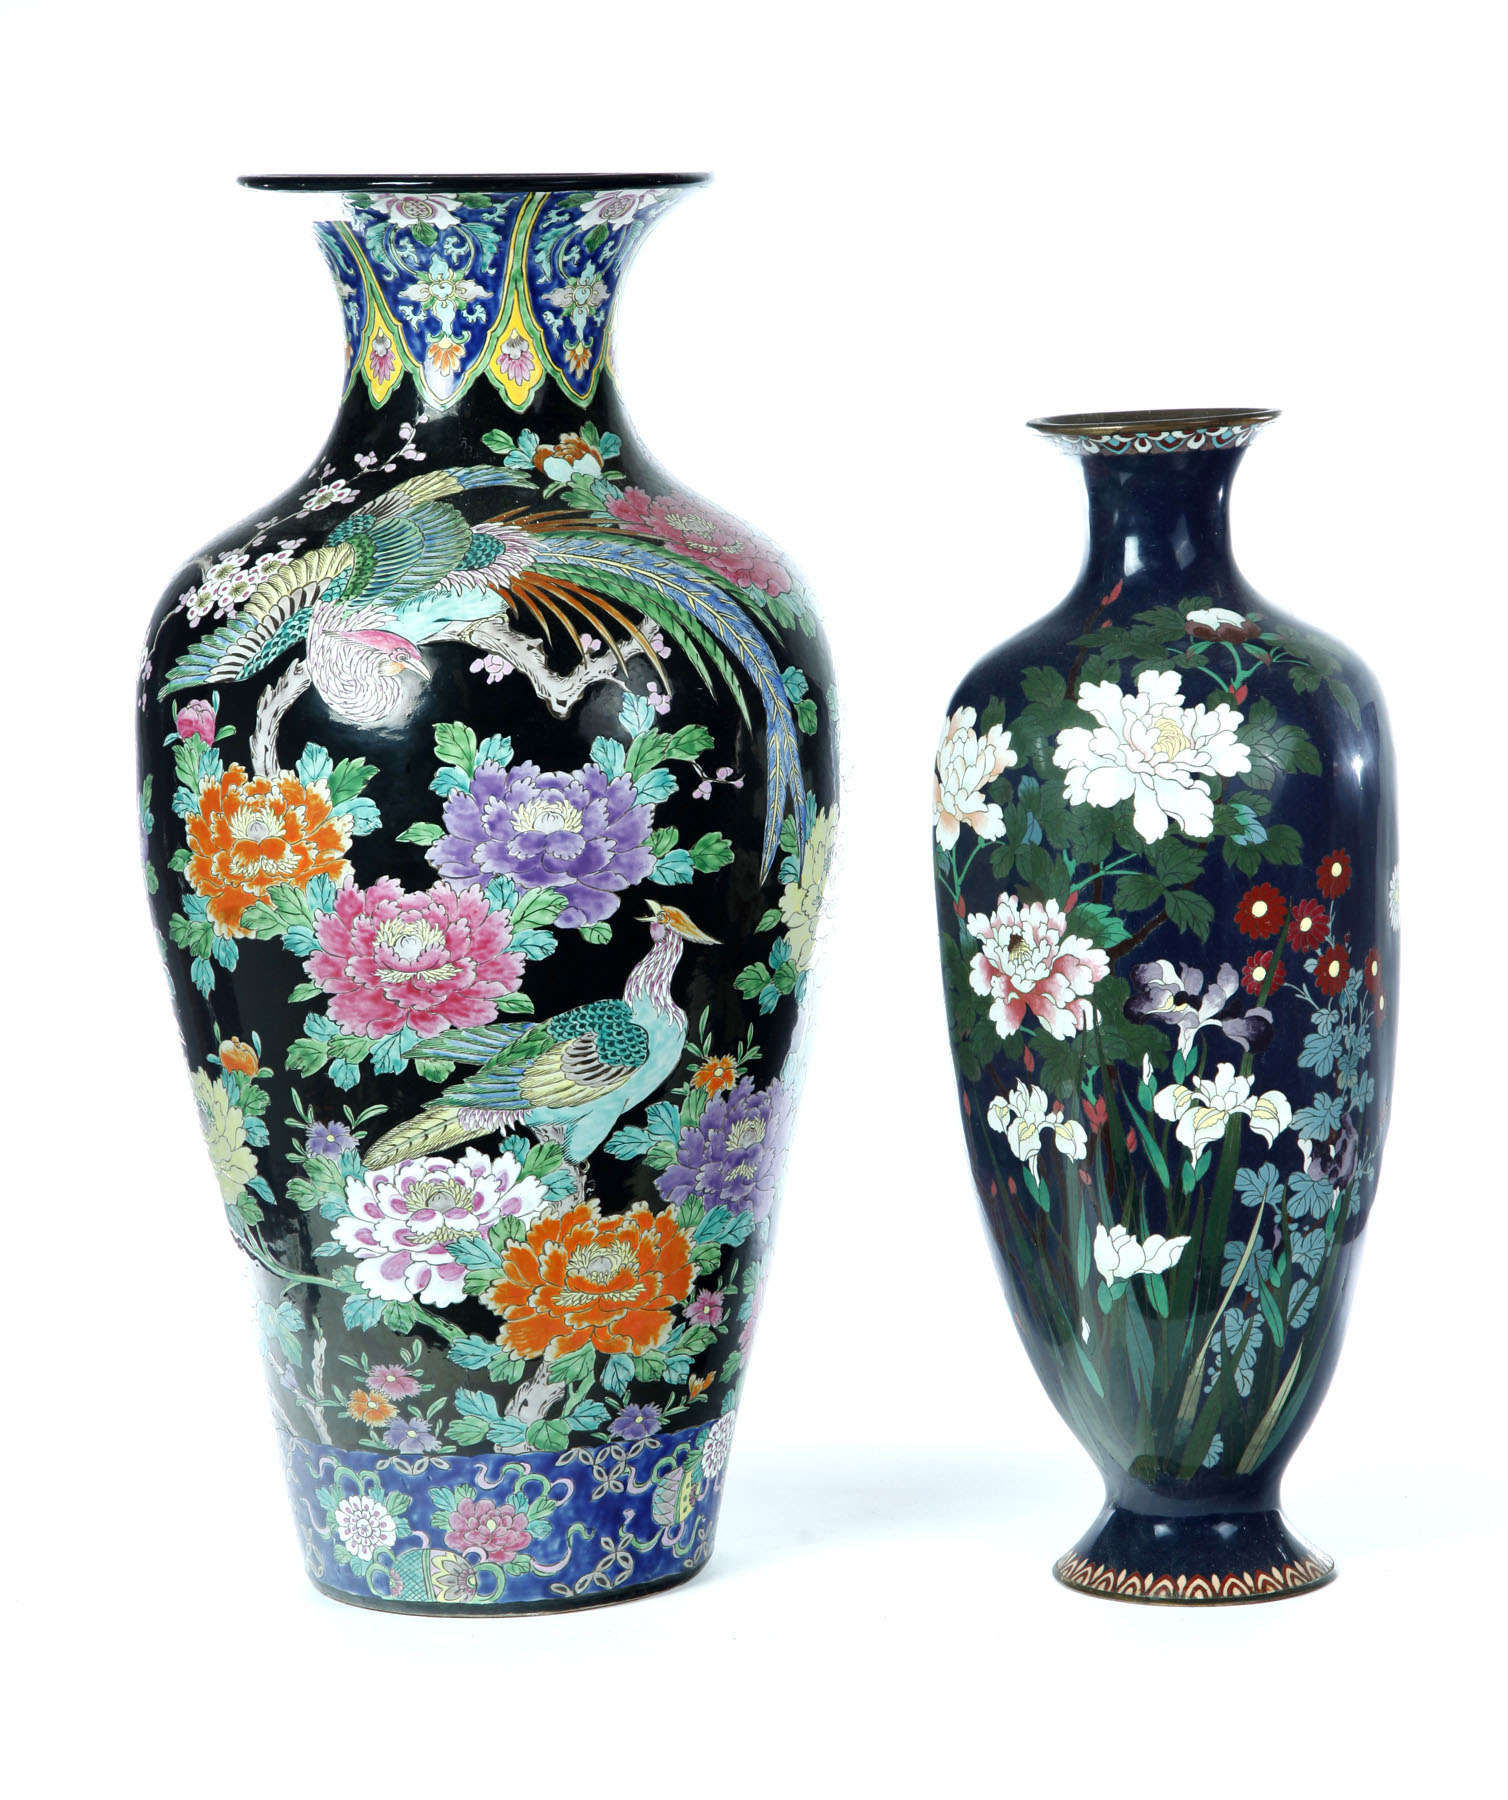 TWO LARGE VASES.China, mid 20th century. Famille Noir style with phoenix, 30""h., and a paneled